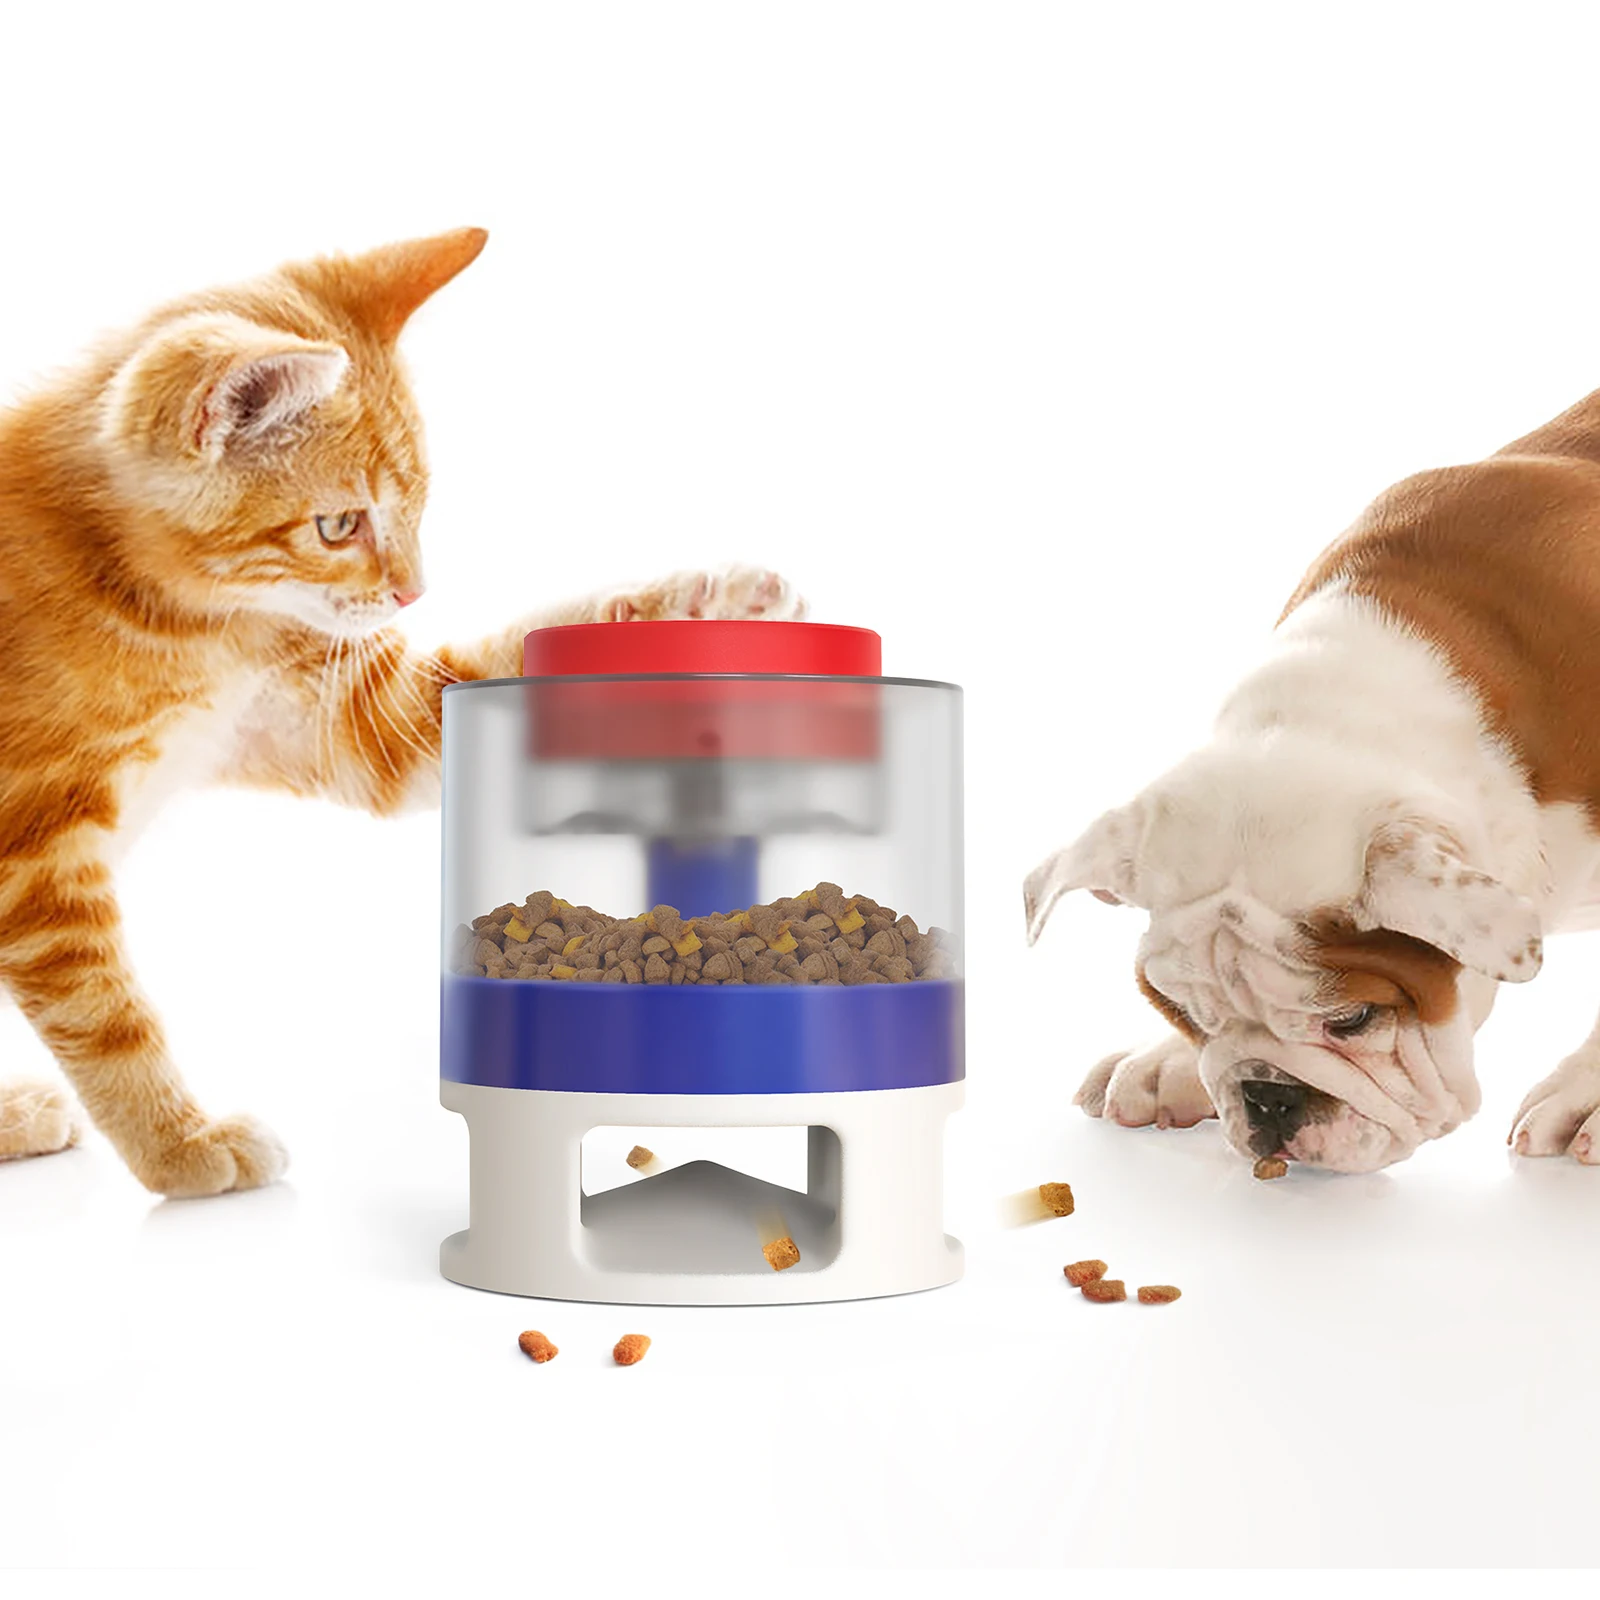 

Dog Food Dispenser Cat Toy Interactive Pet Toy Slow Food Dispenser Dogs Food Puzzle Feeder Toys